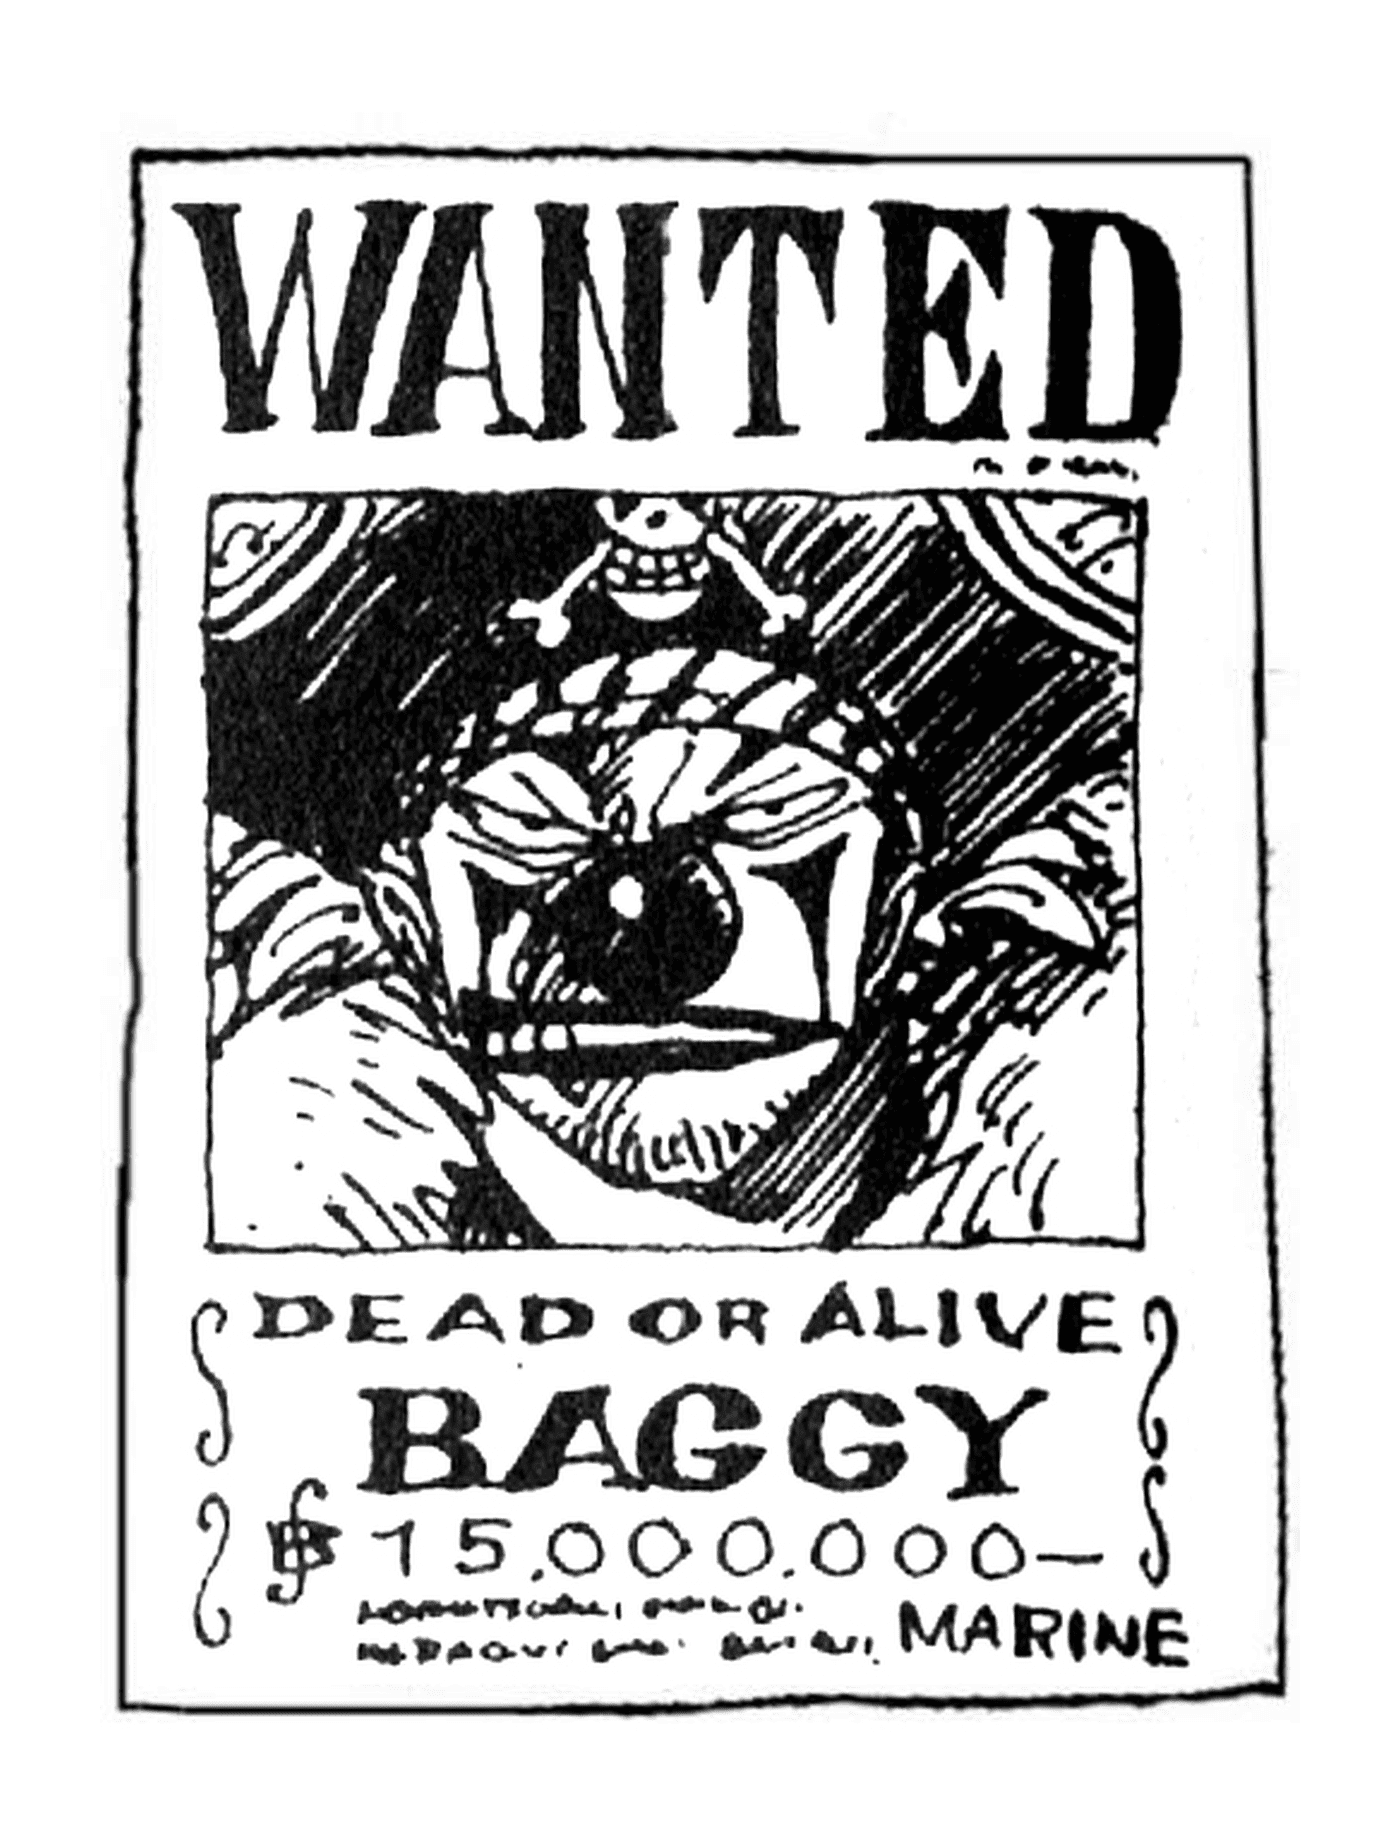  Wanted Baggy, dead or alive 